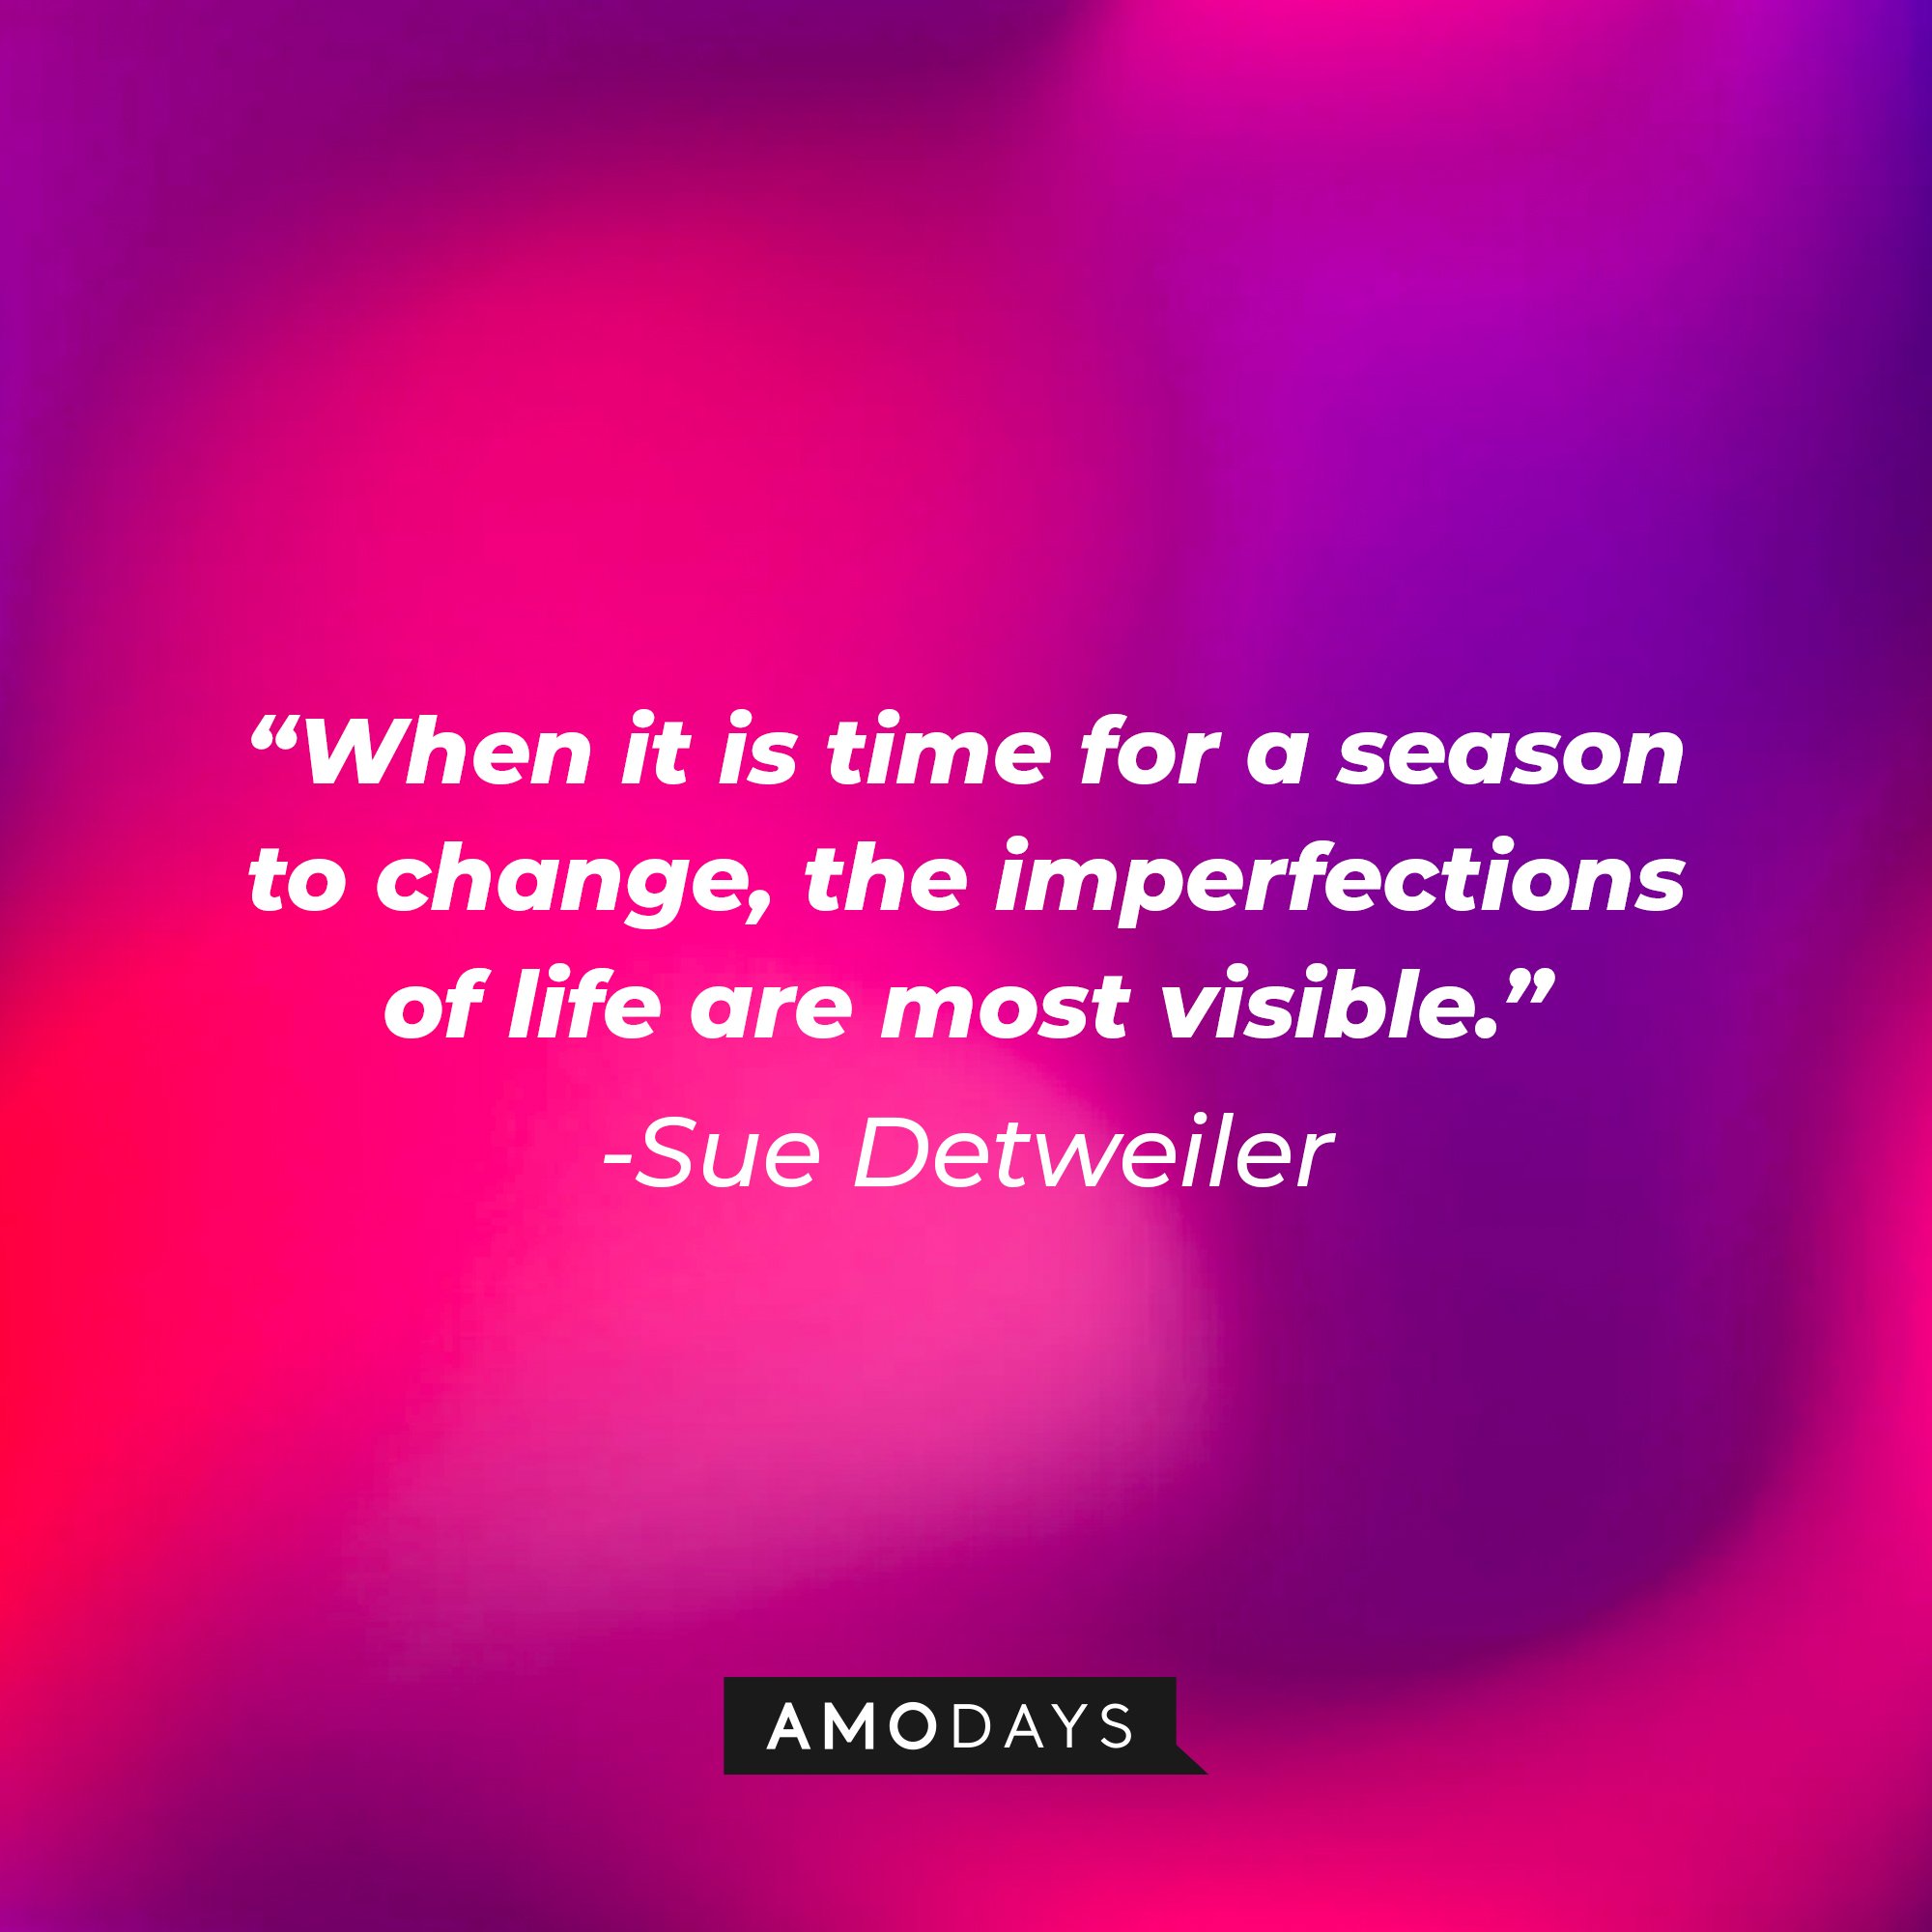 Sue Detweiler’s quote: “When it is time for a season to change, the imperfections of life are most visible." | Image: AmoDays